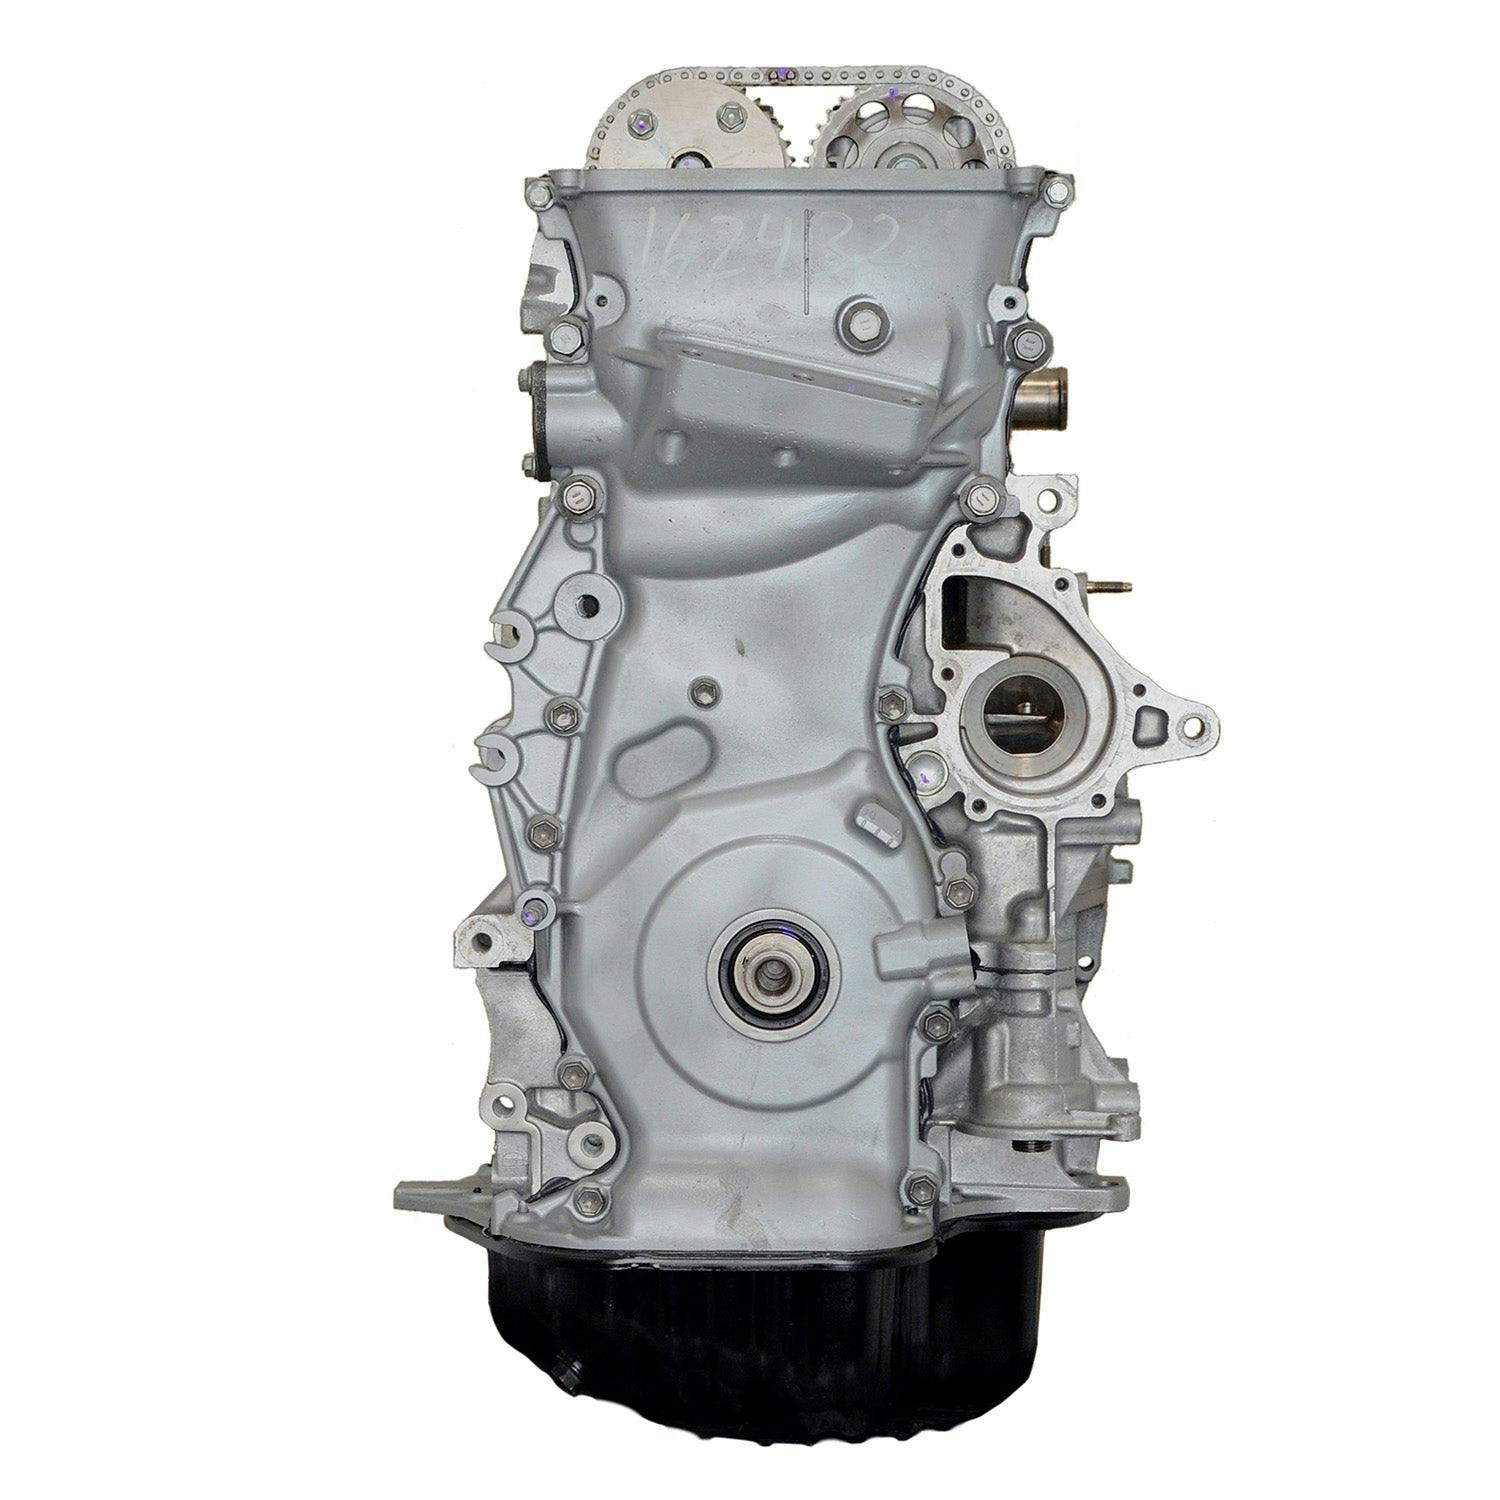 2.4L Inline-4 Engine for 2007-2011 Toyota Camry